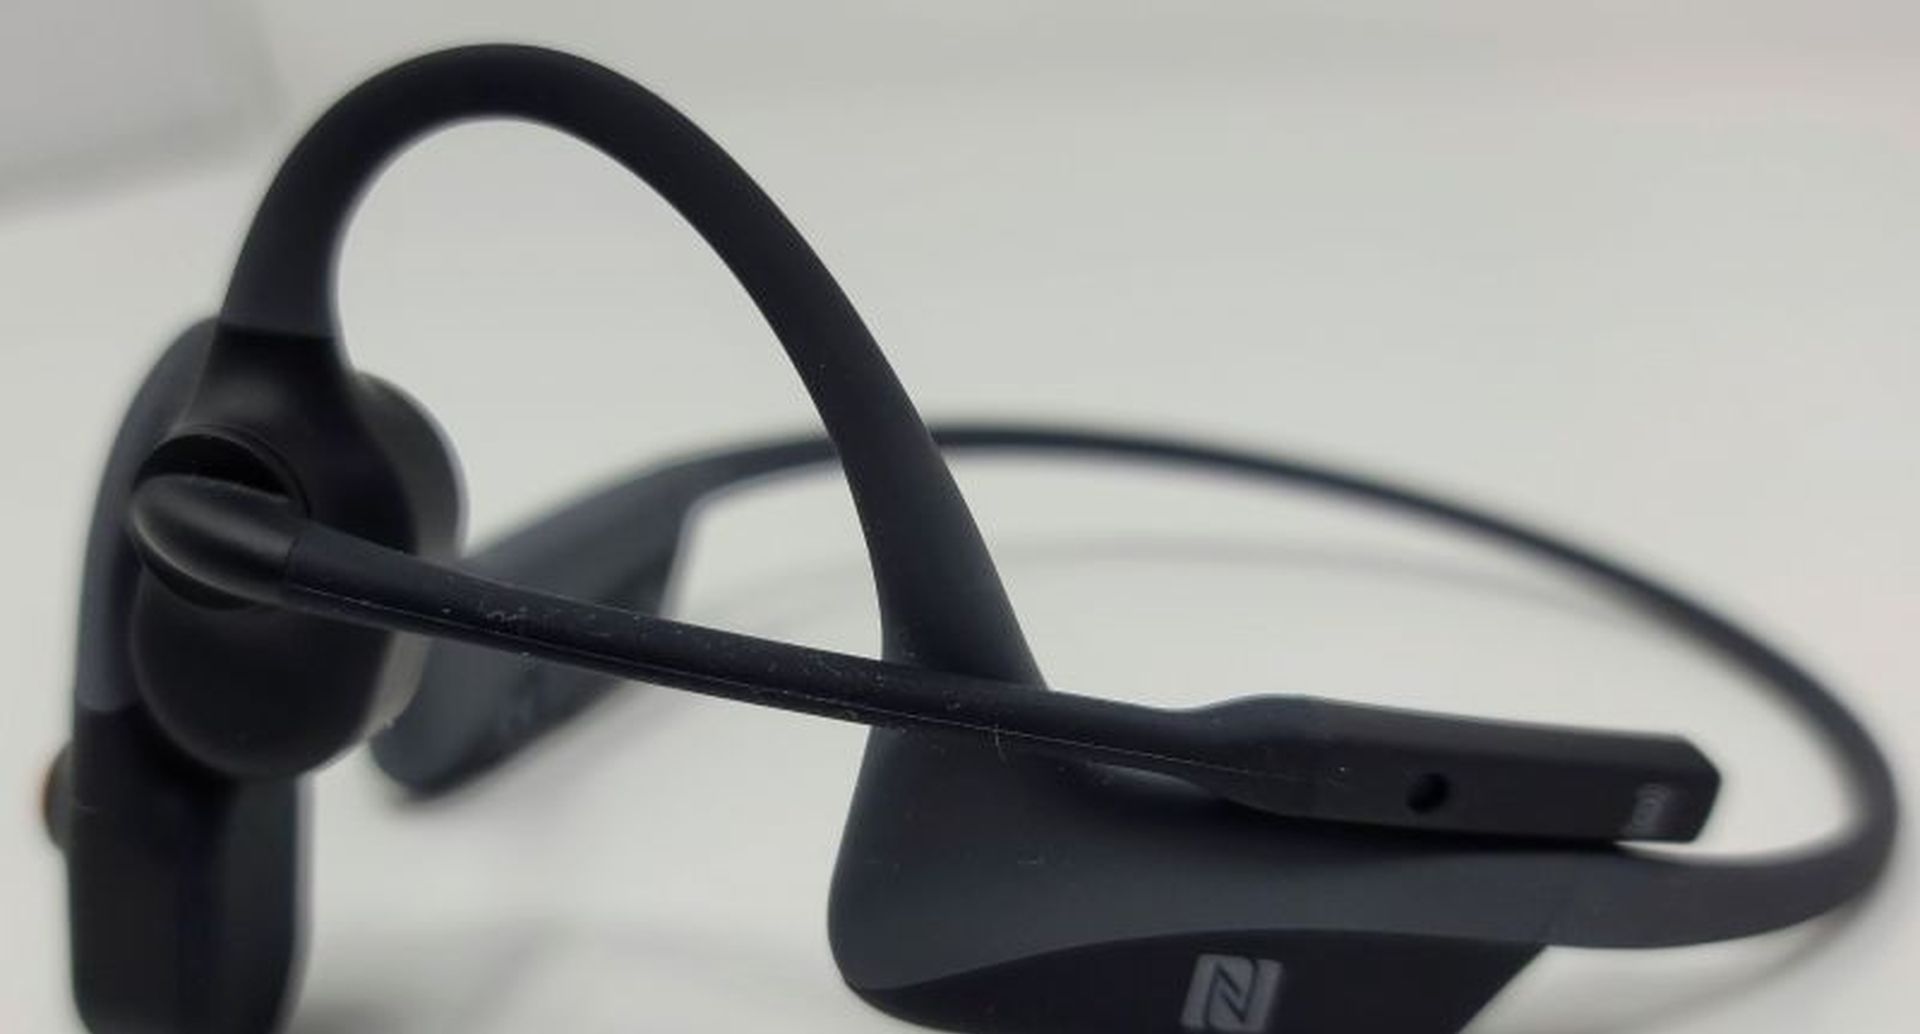 In this article, we are going to be covering how to fix Aftershokz mute beeping issue, which is a common issue that occurs for MS Teams users when using...